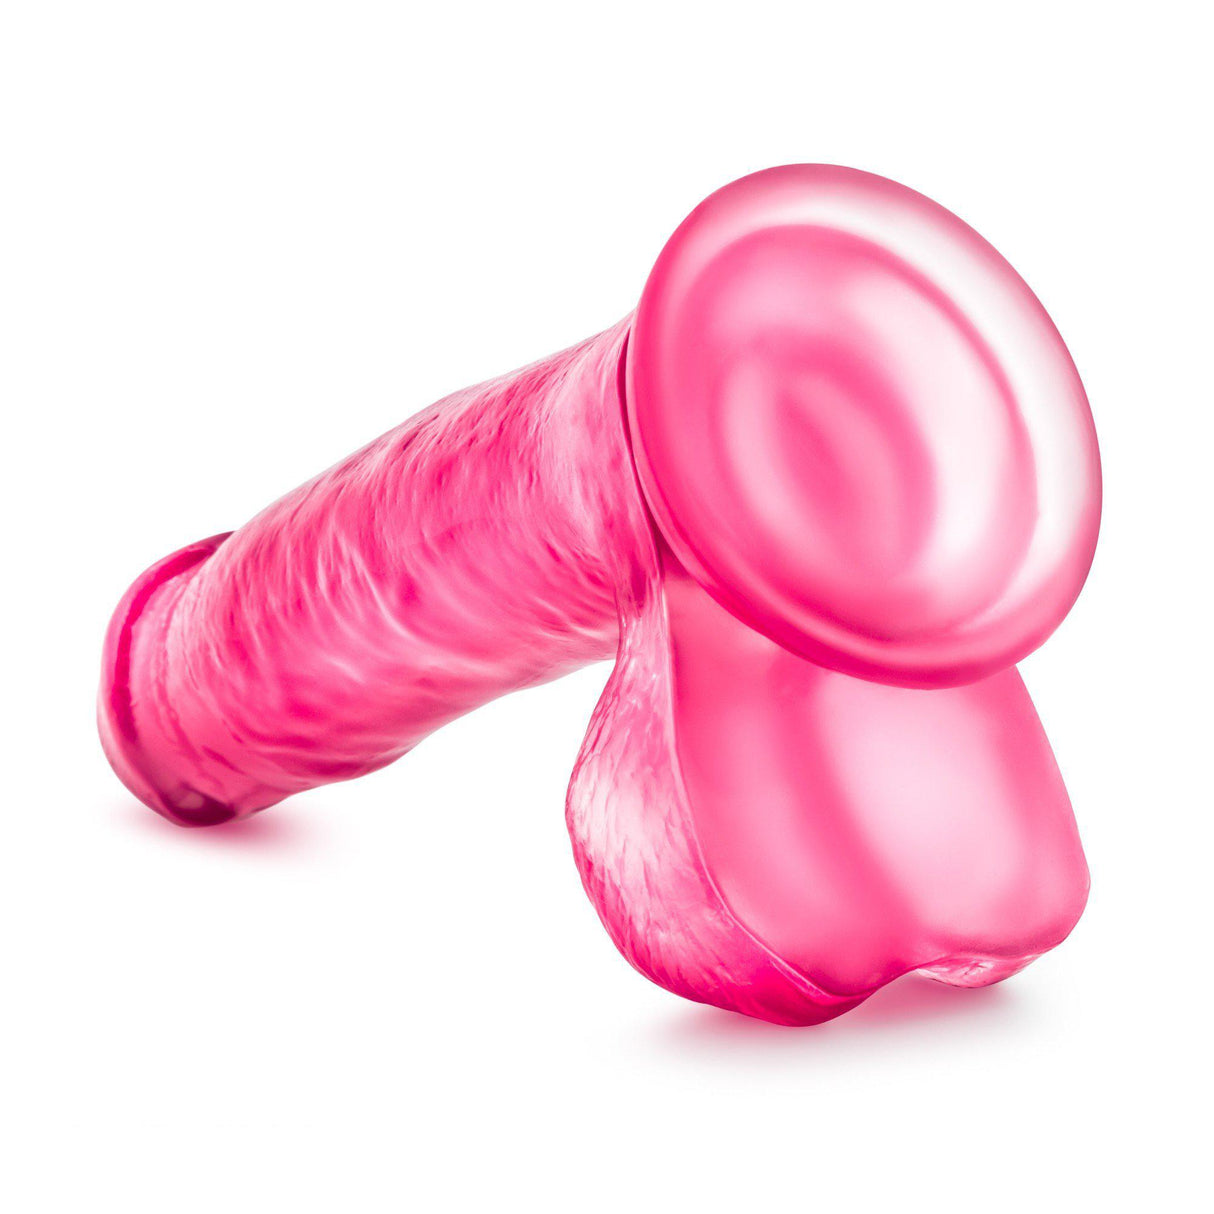 Blush B Yours Sweet N' Hard 1 Dildo with Suction Cup